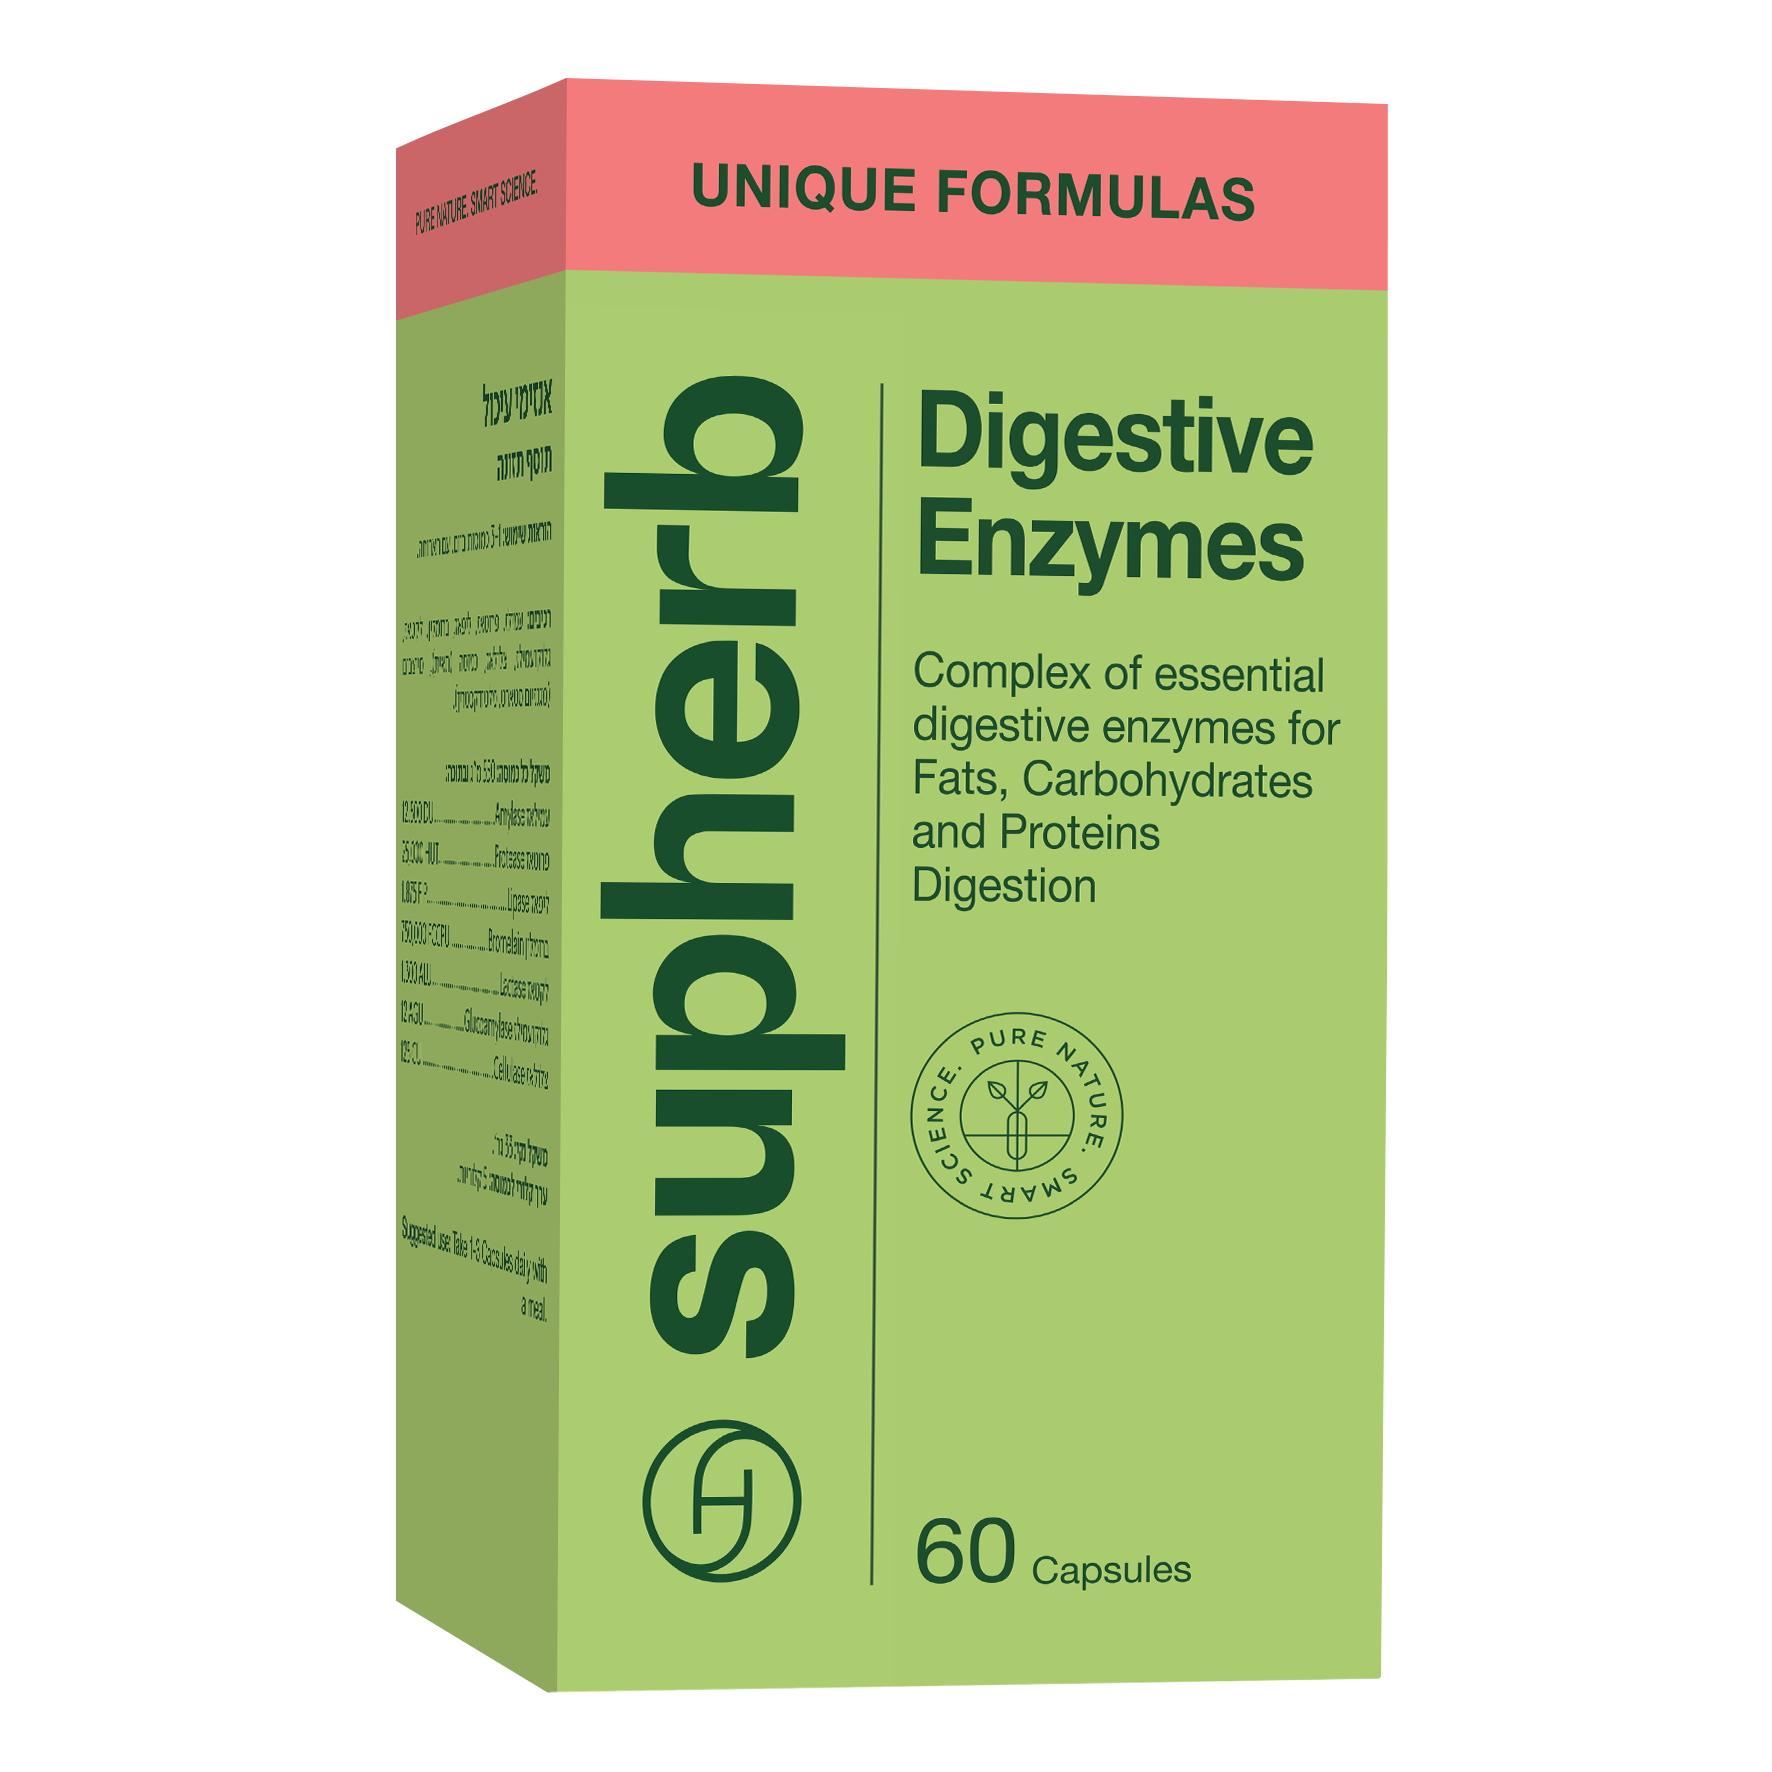 Digestive Enzymes Complex